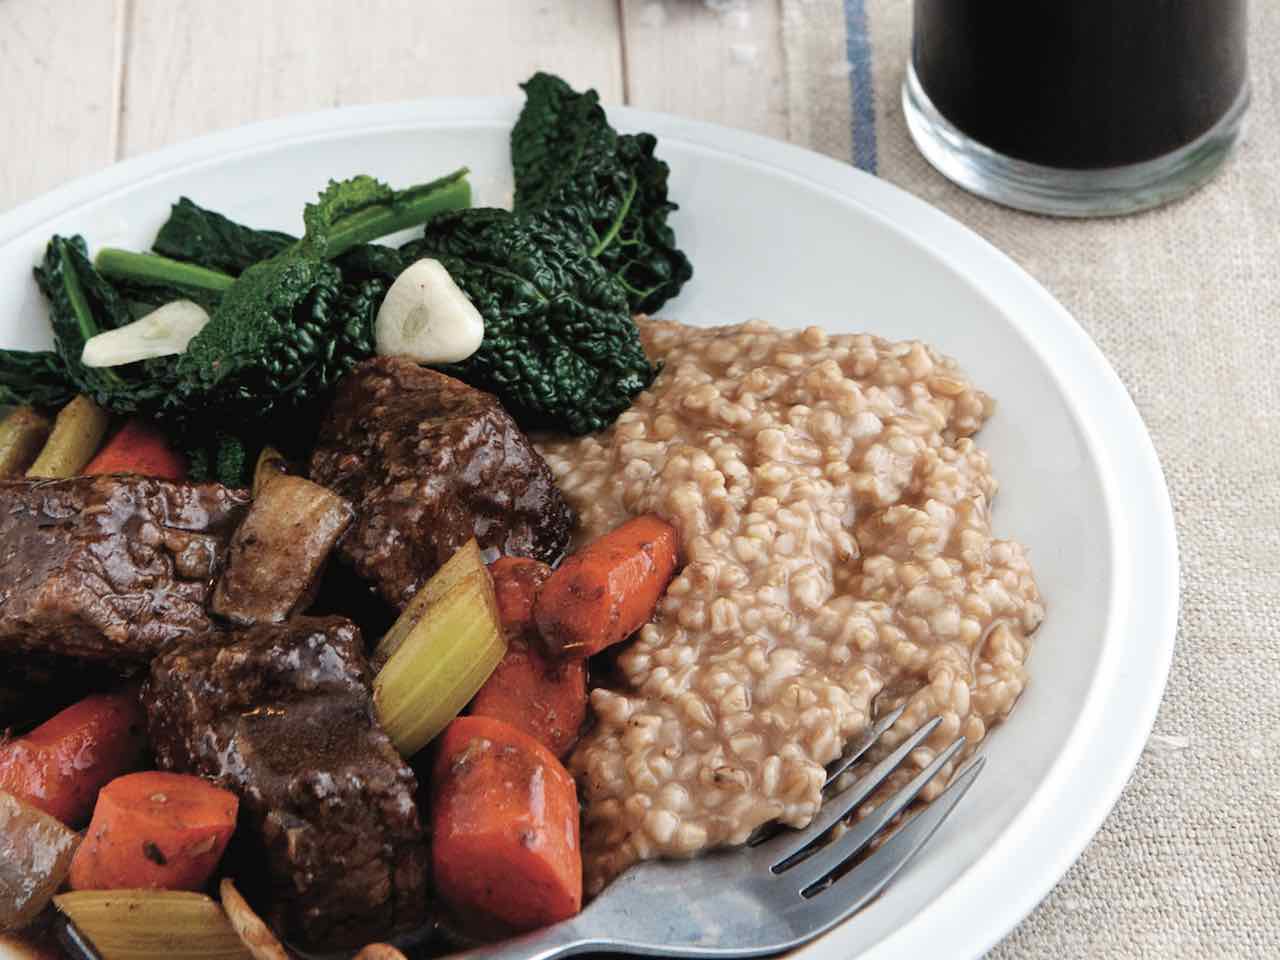 Stout-braised beef stew, oat risotto and Emerald Isle greens